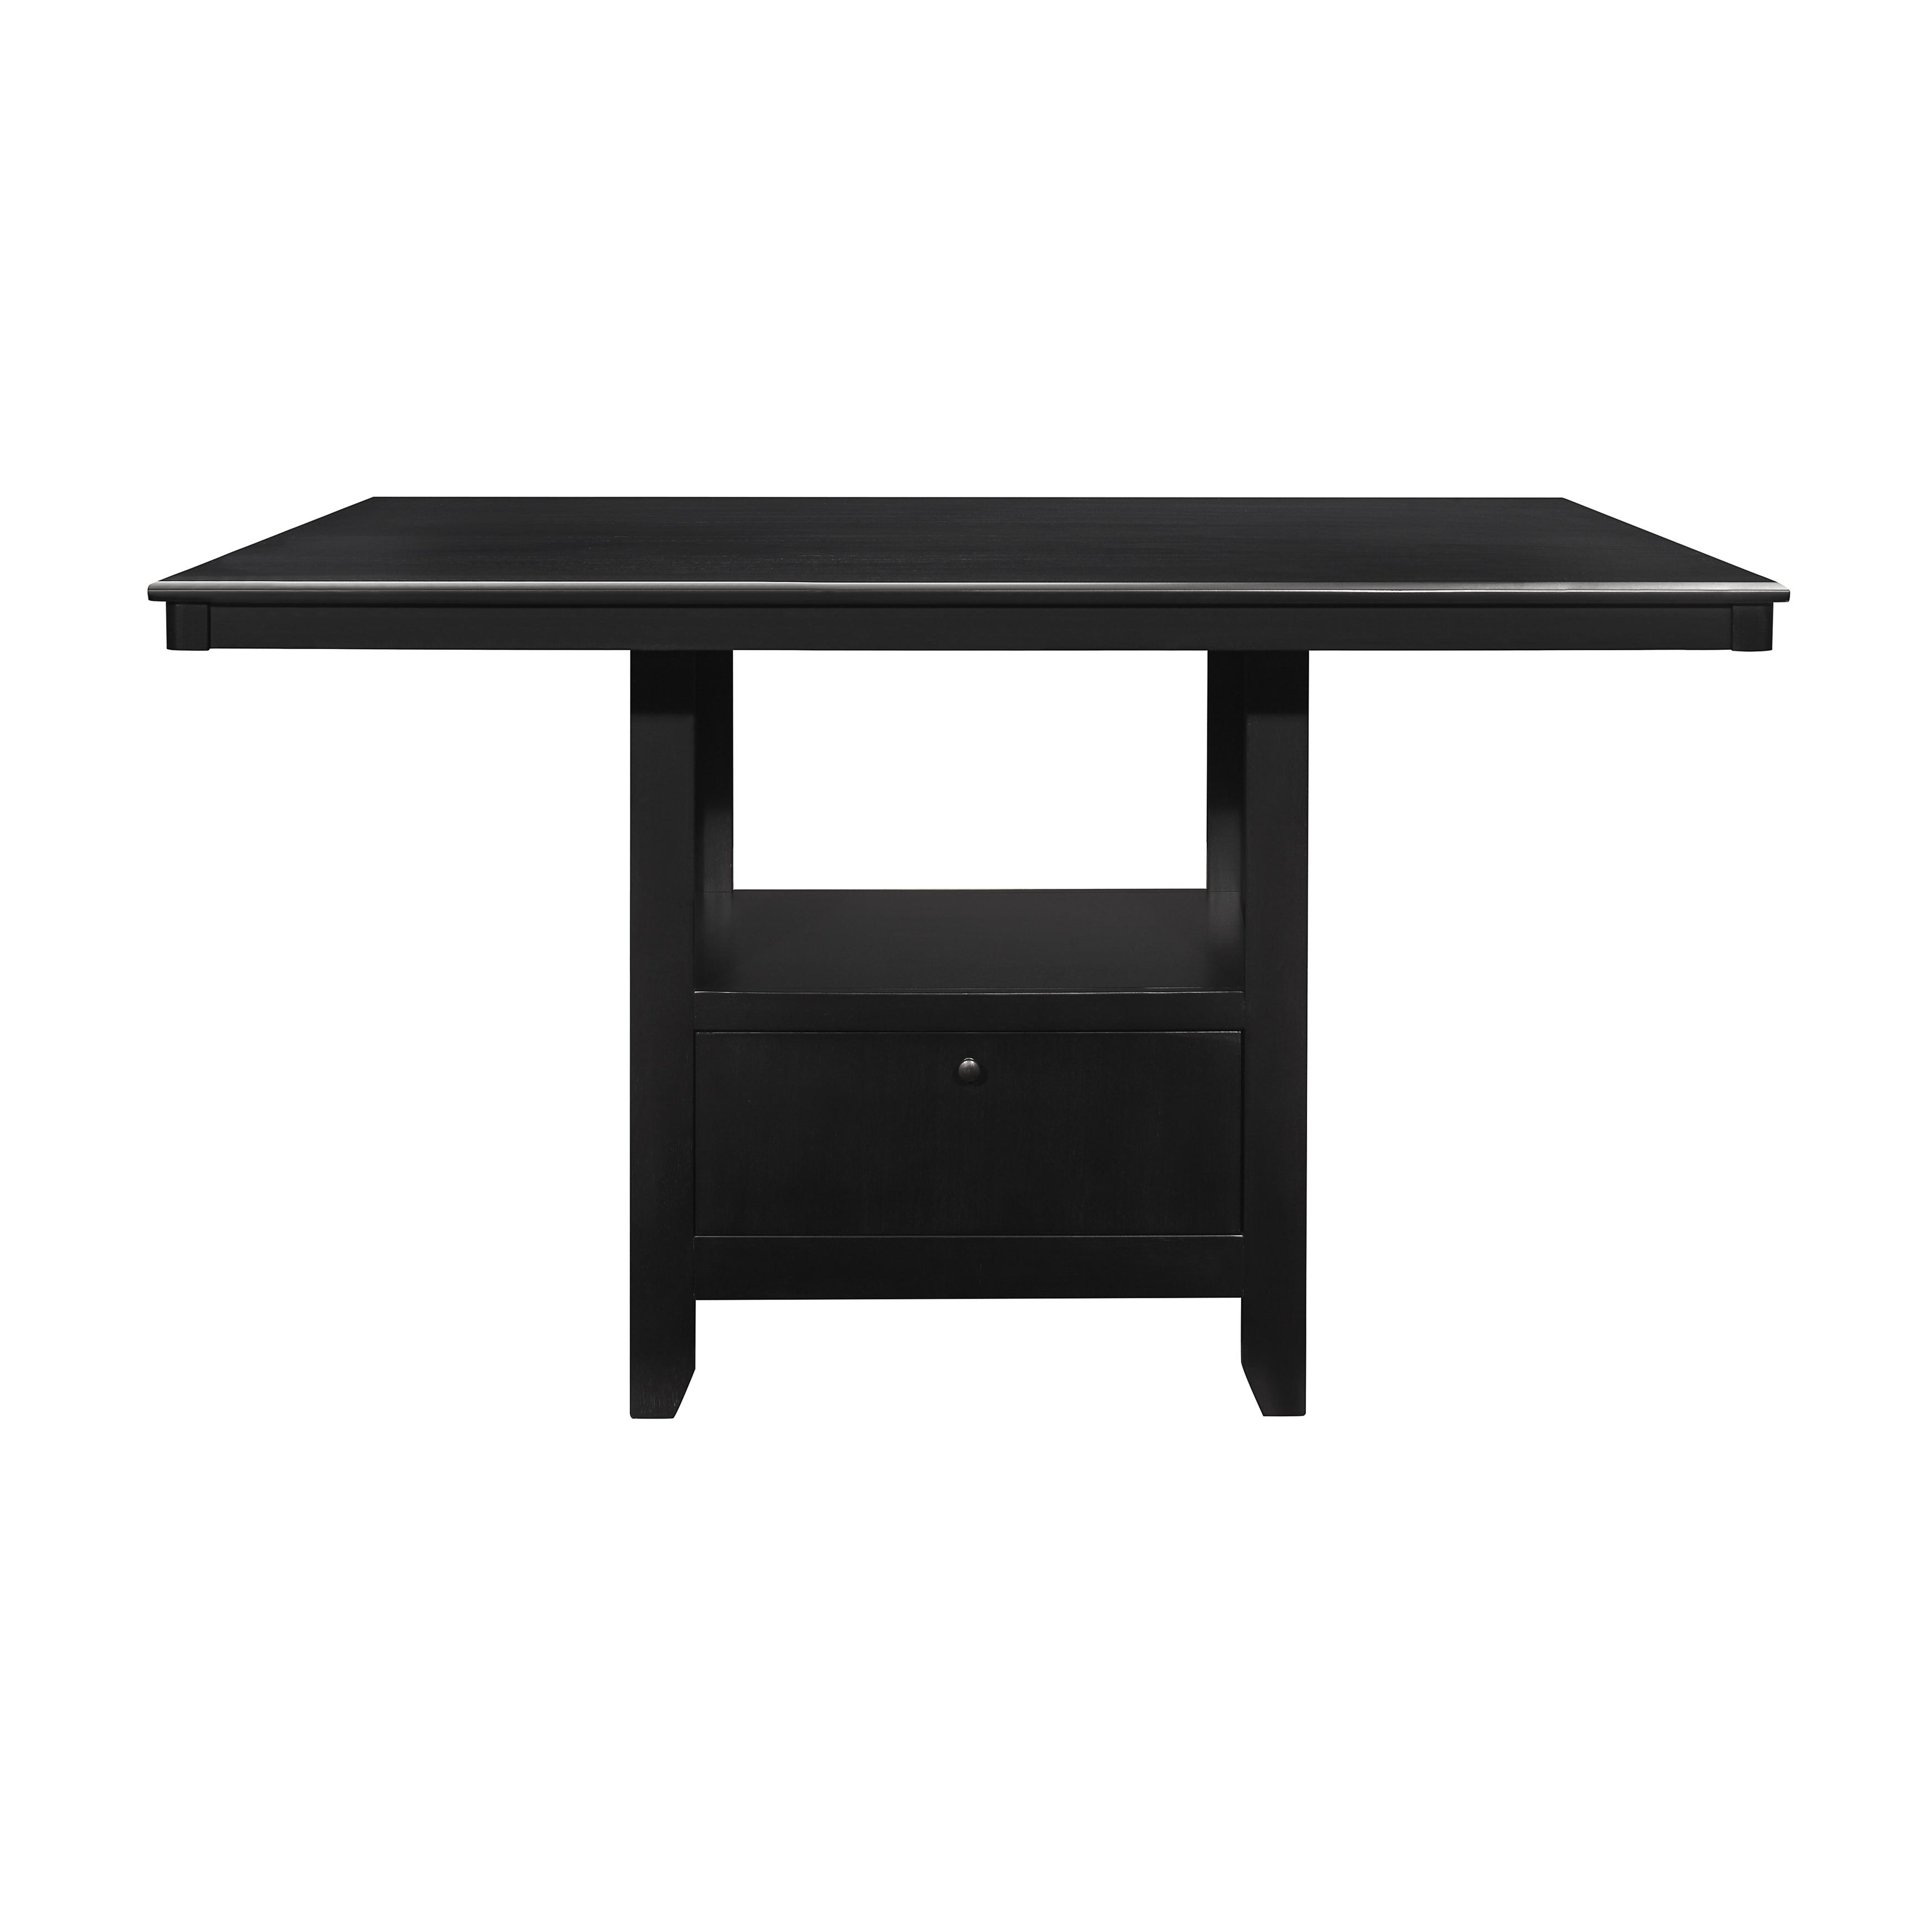 

    
Contemporary Charcoal Grey Wood Counter Height Dining Table Homelegance Raven 5825-36-CT
